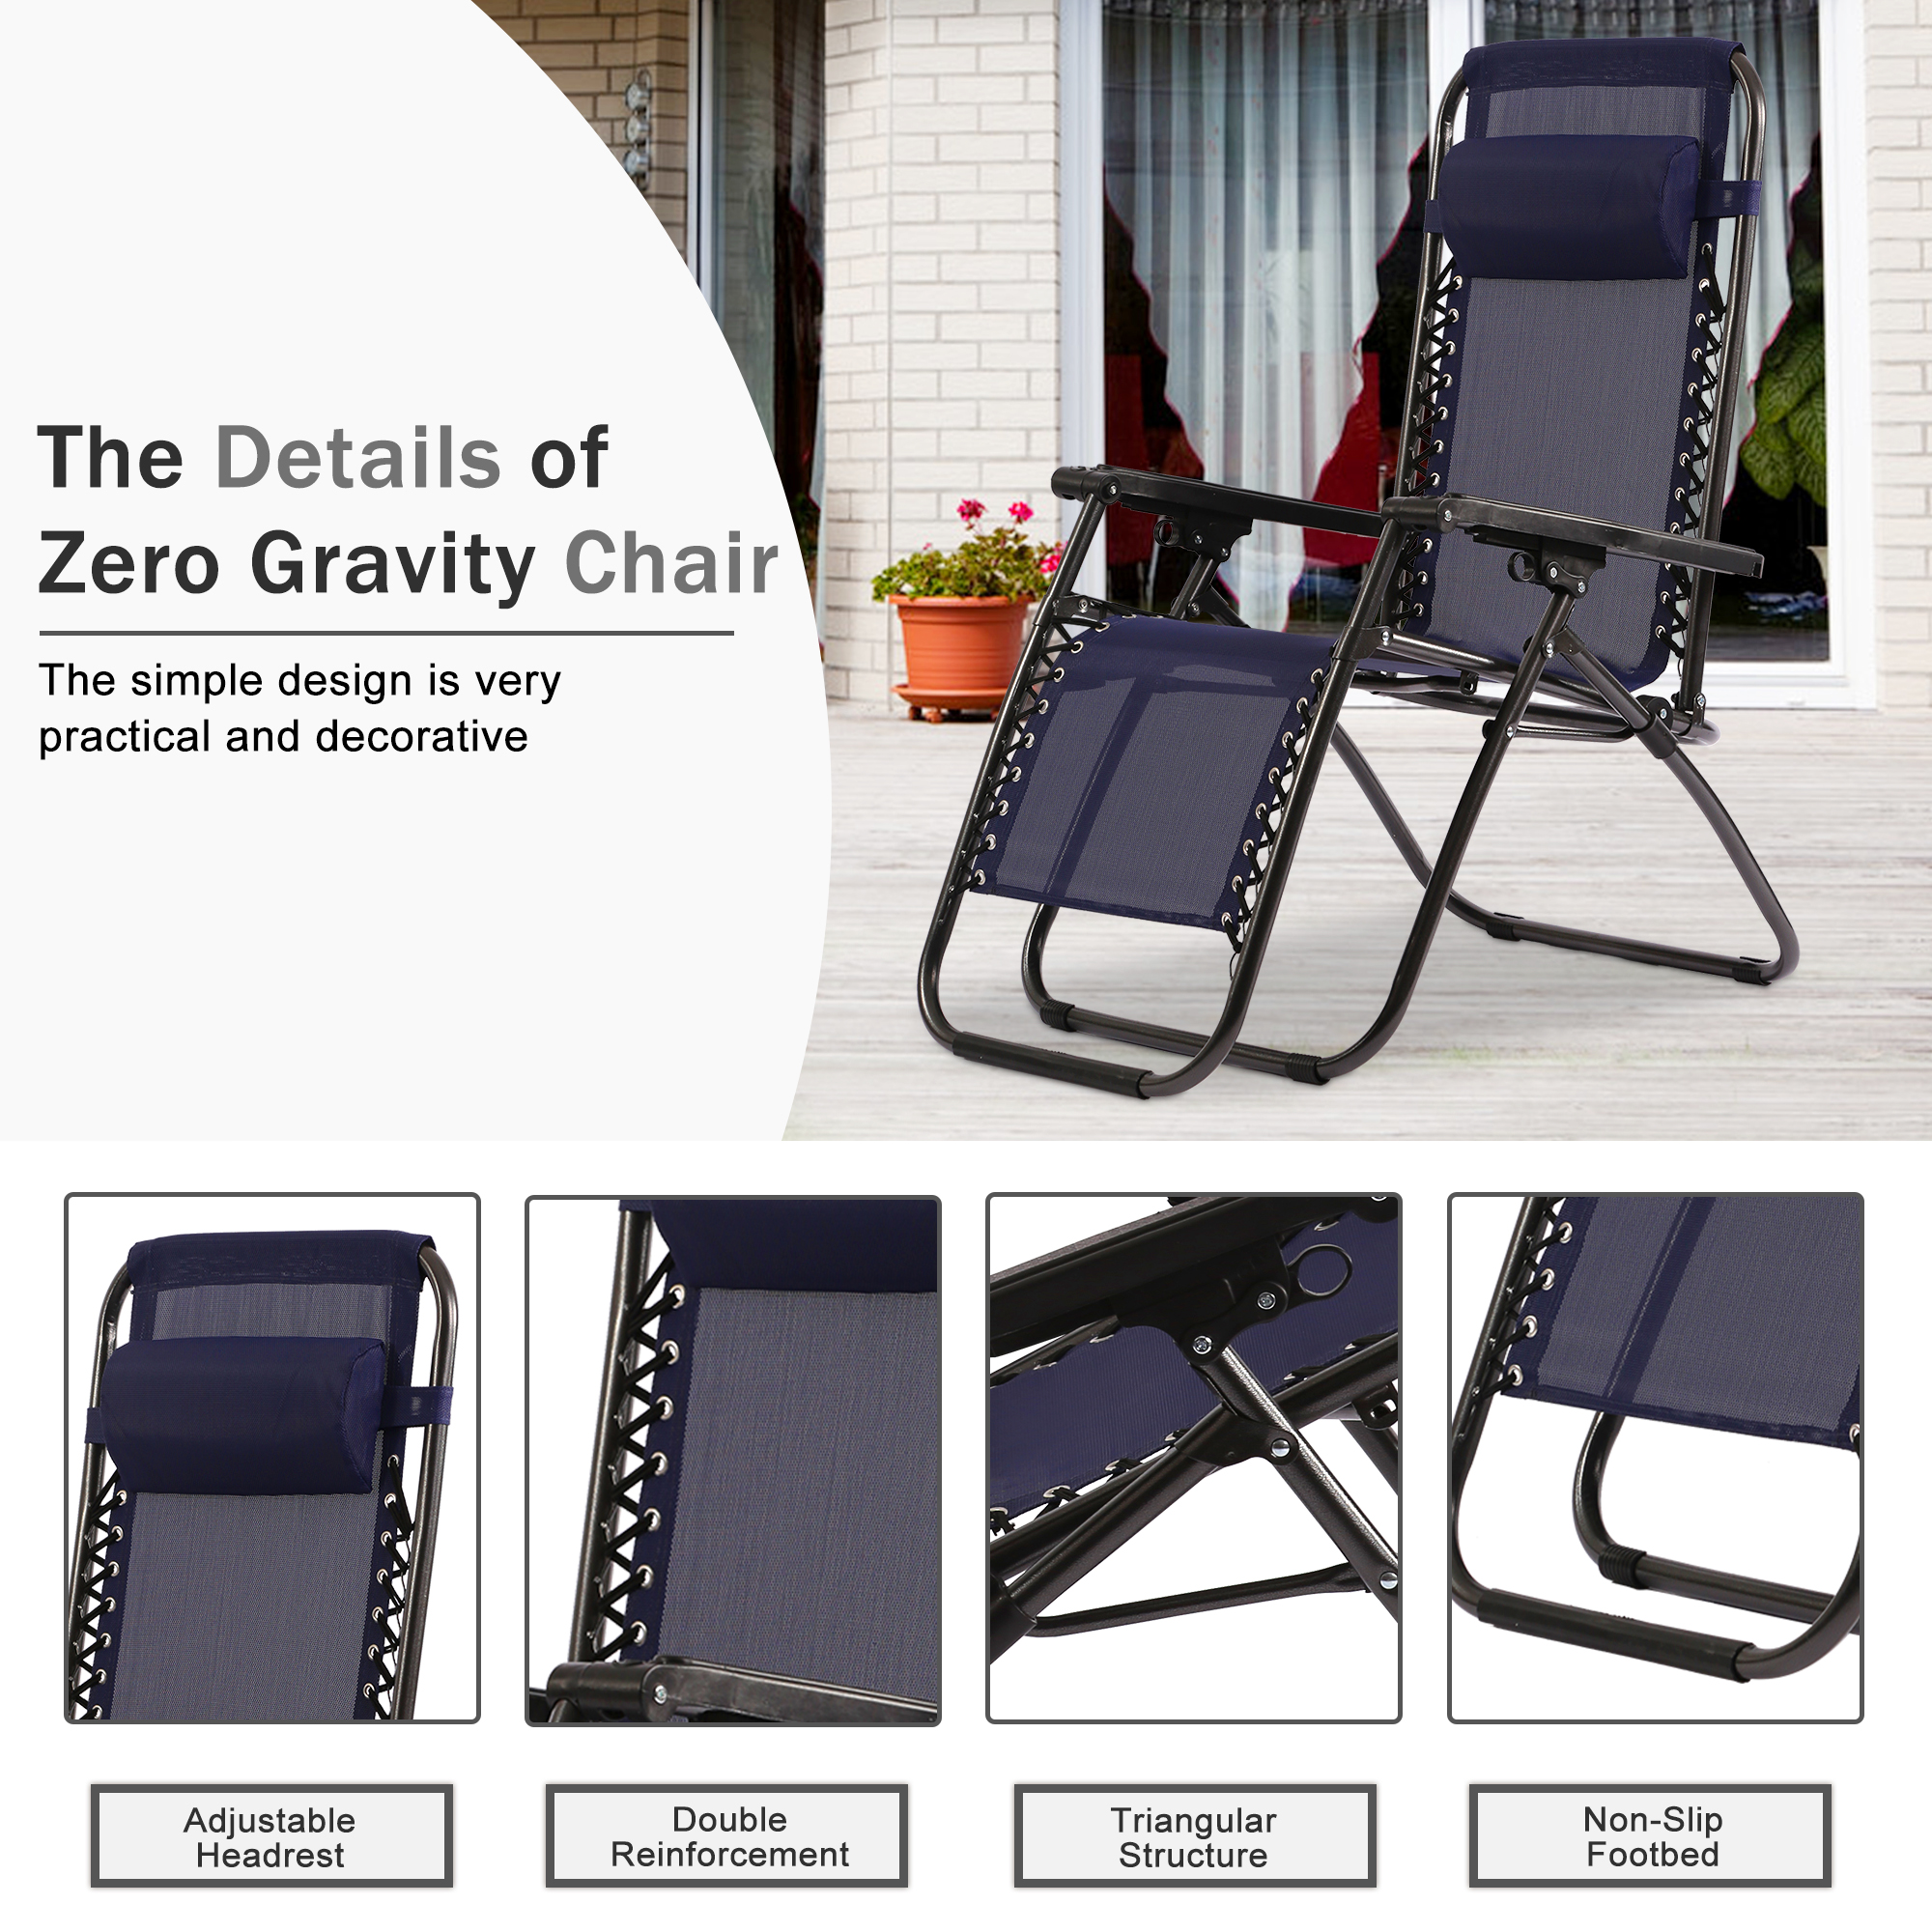 Outdoor Zero Gravity Chairs 2 Pack, Folding Patio Lounge Camping Chair Recliner with Adjustable Pillow Outdoor Furniture for Pool Side Camping Yard Beach - image 4 of 7